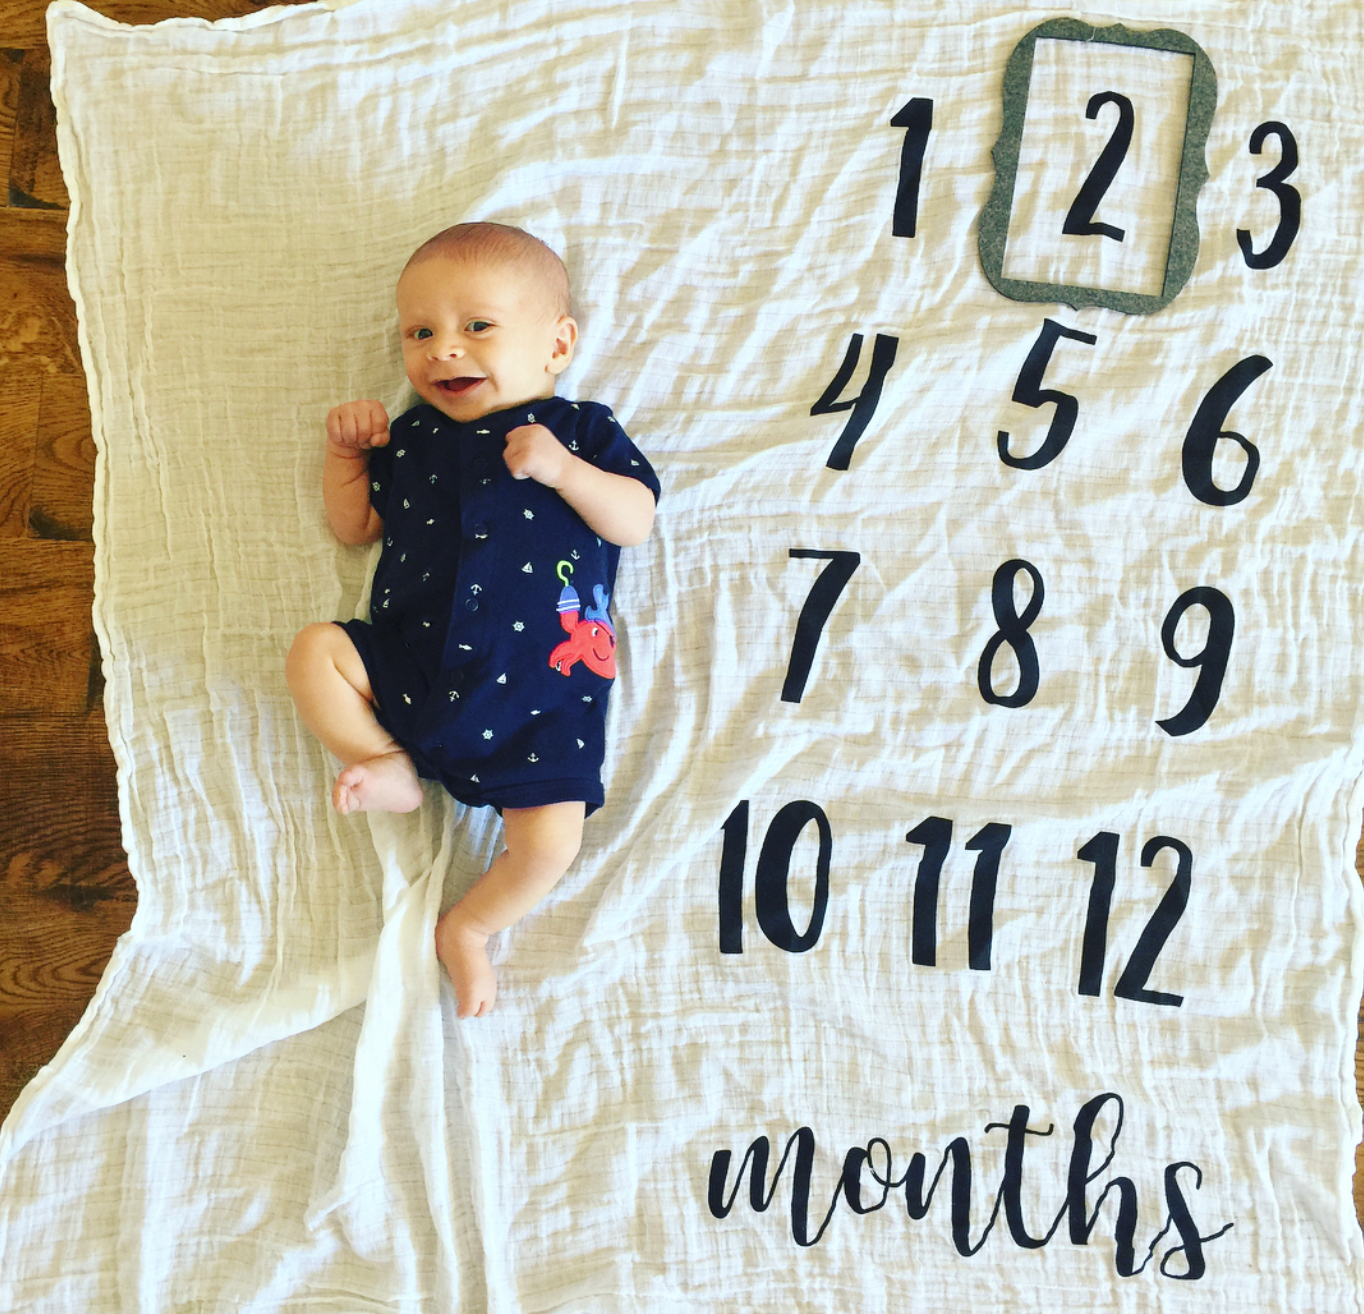 2 months old